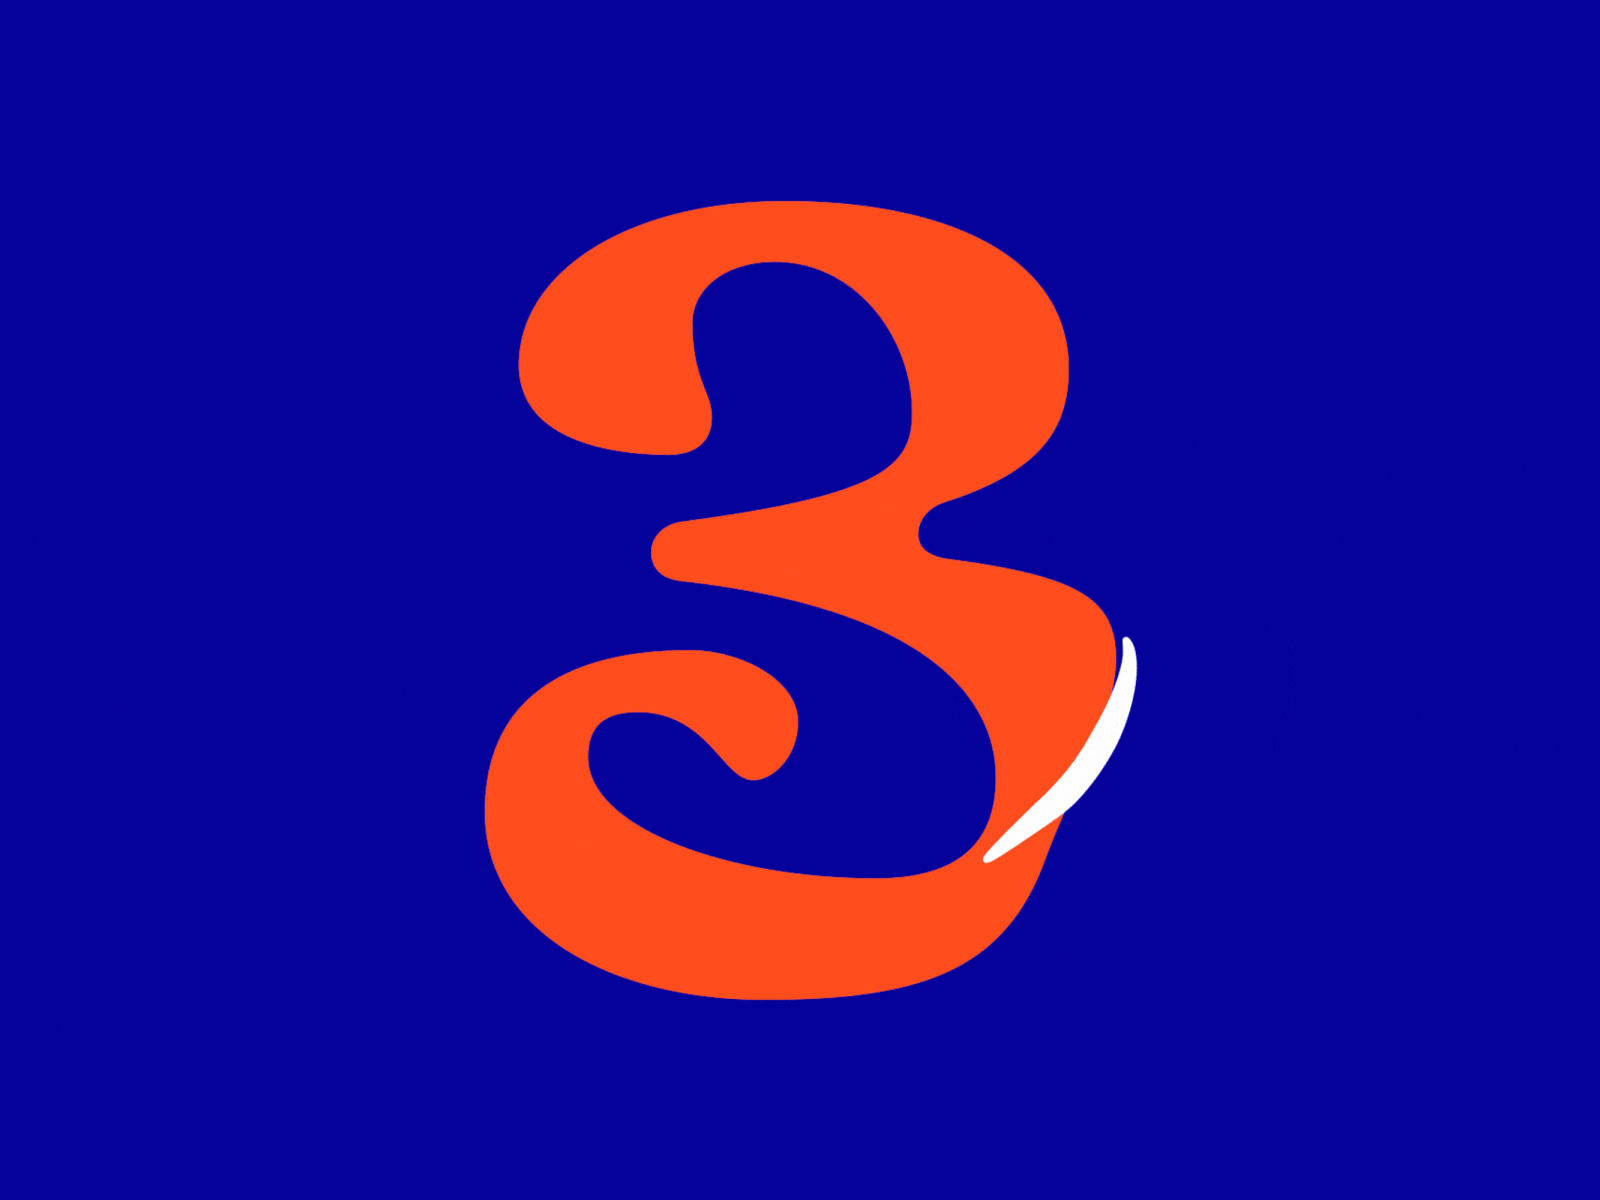 36 Days of Type / 3 36 days of type 36daysoftype 36daysoftype08 36dot ae after effects animated animated type animation animography colors design kinetic kinetic type motion motion design motion graphic motion graphics type typography